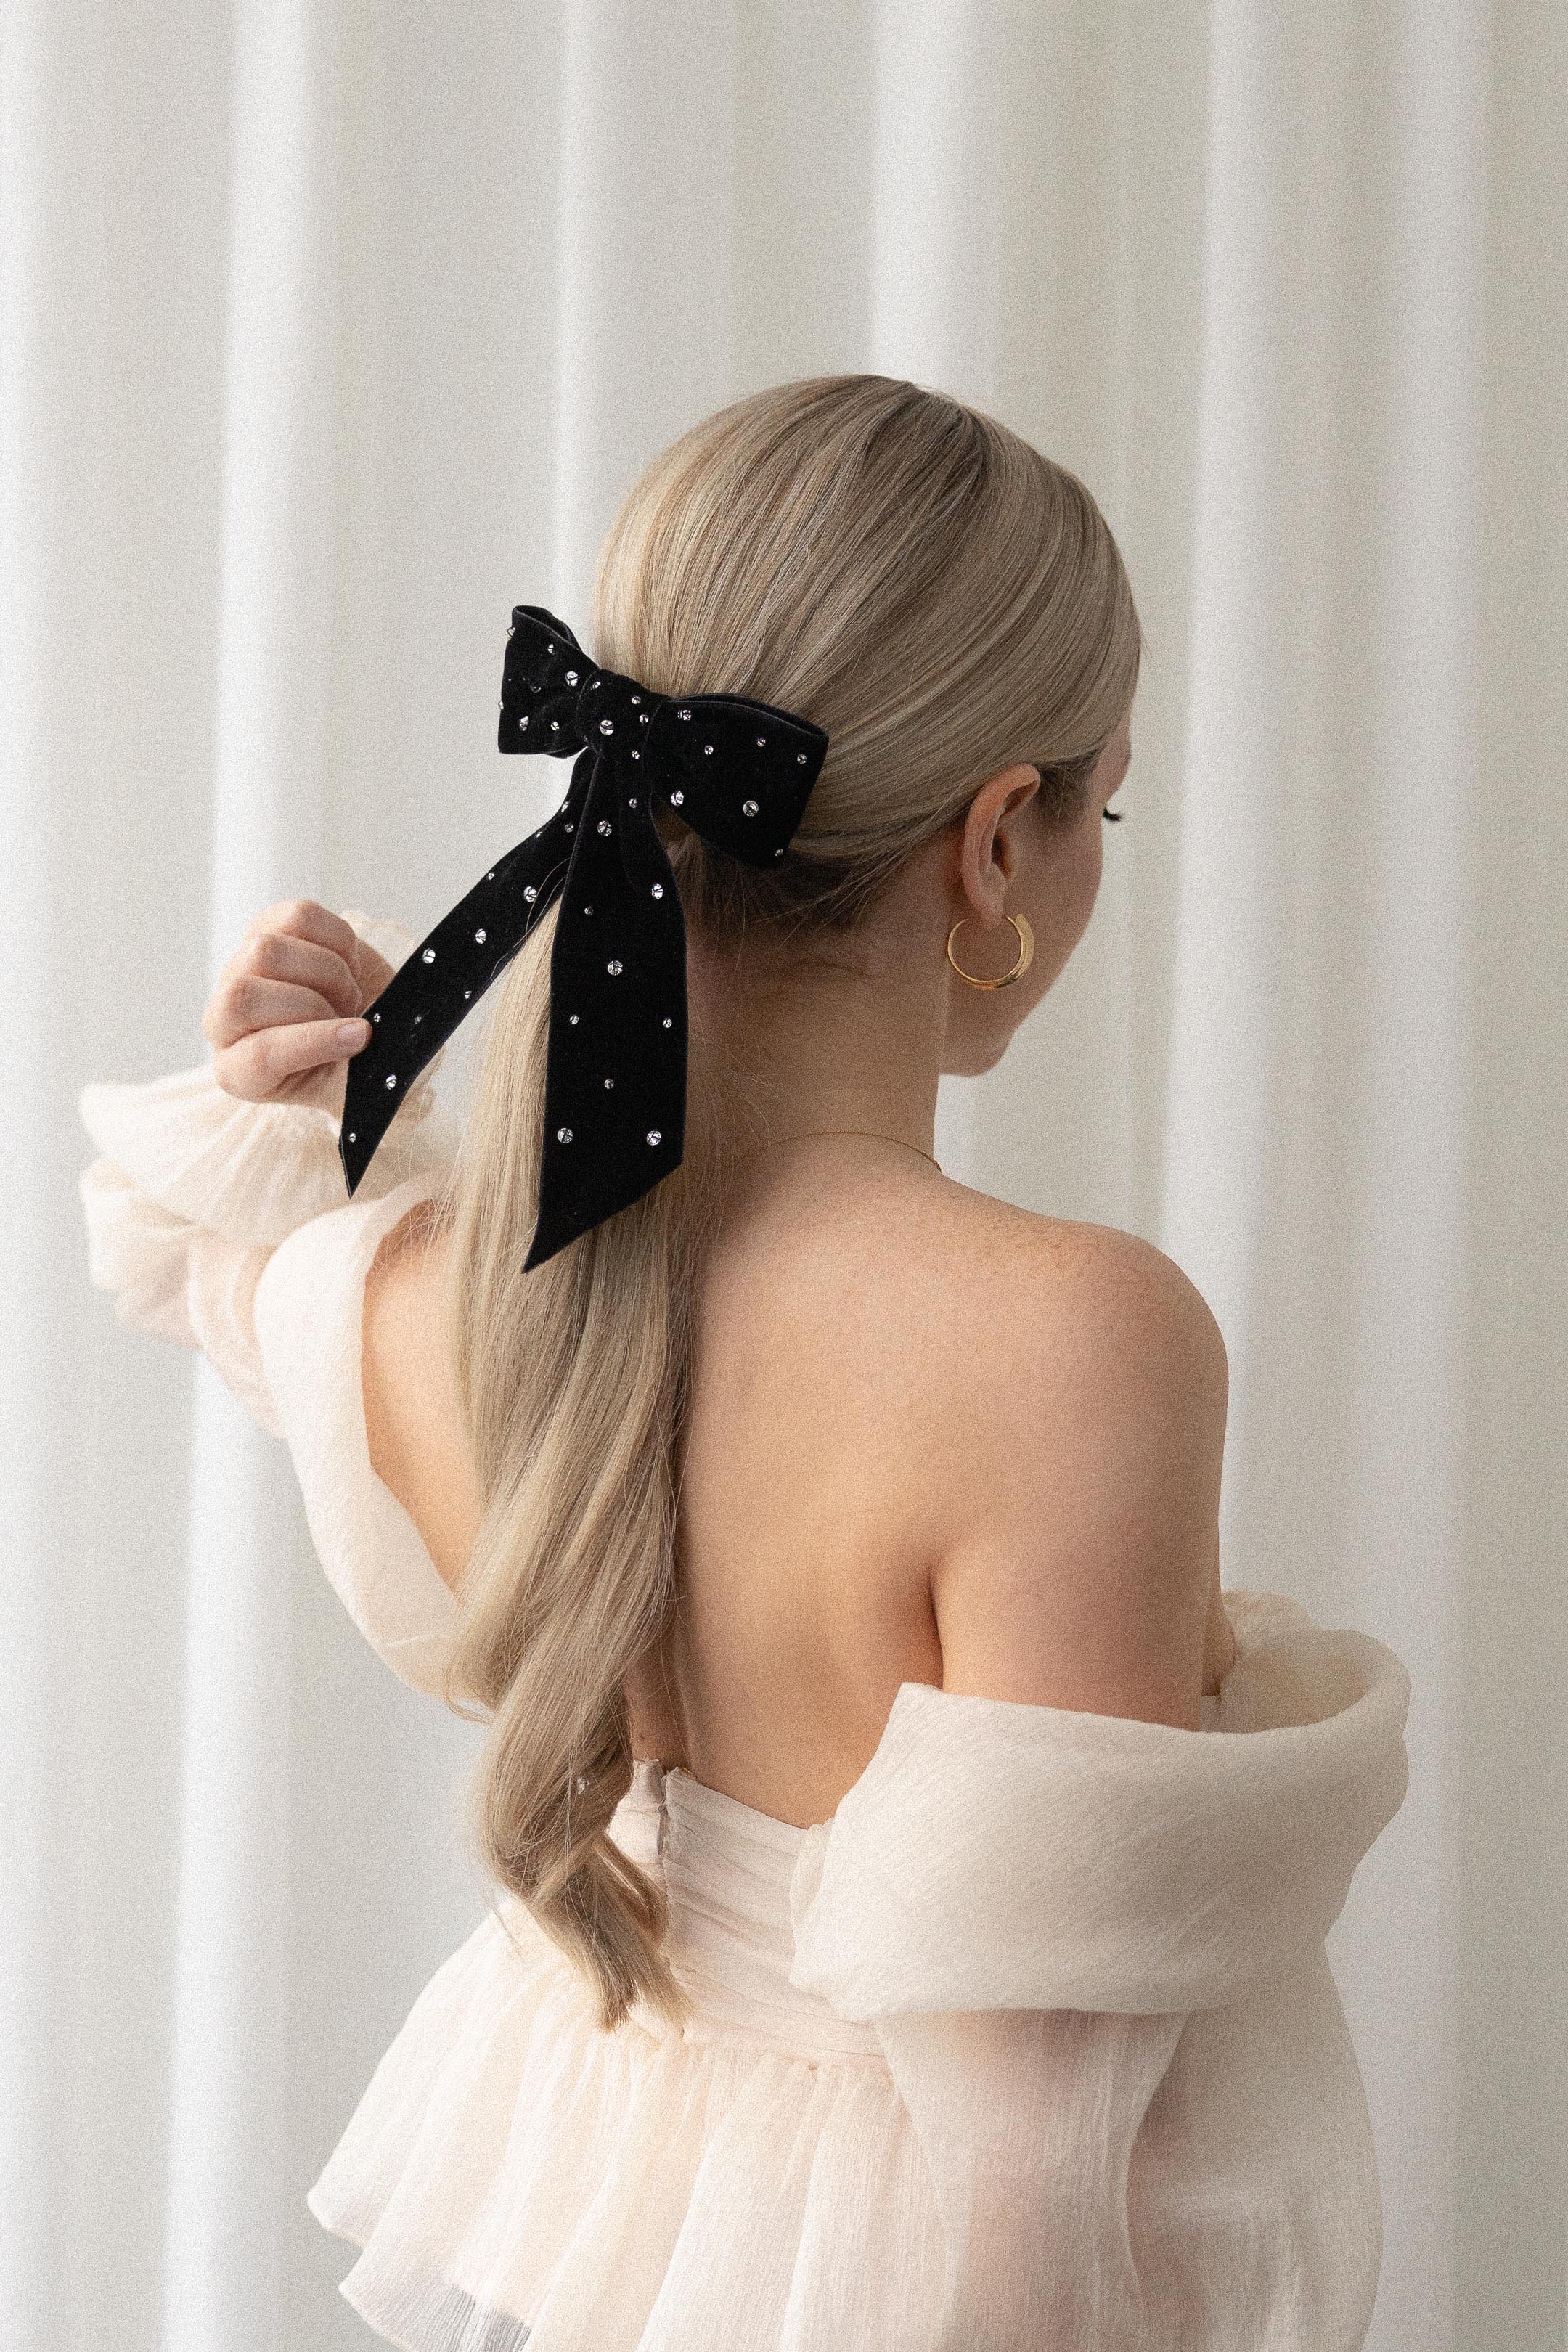 How To Do a Bow Hairstyle For Beginners - Everyday Hair inspiration